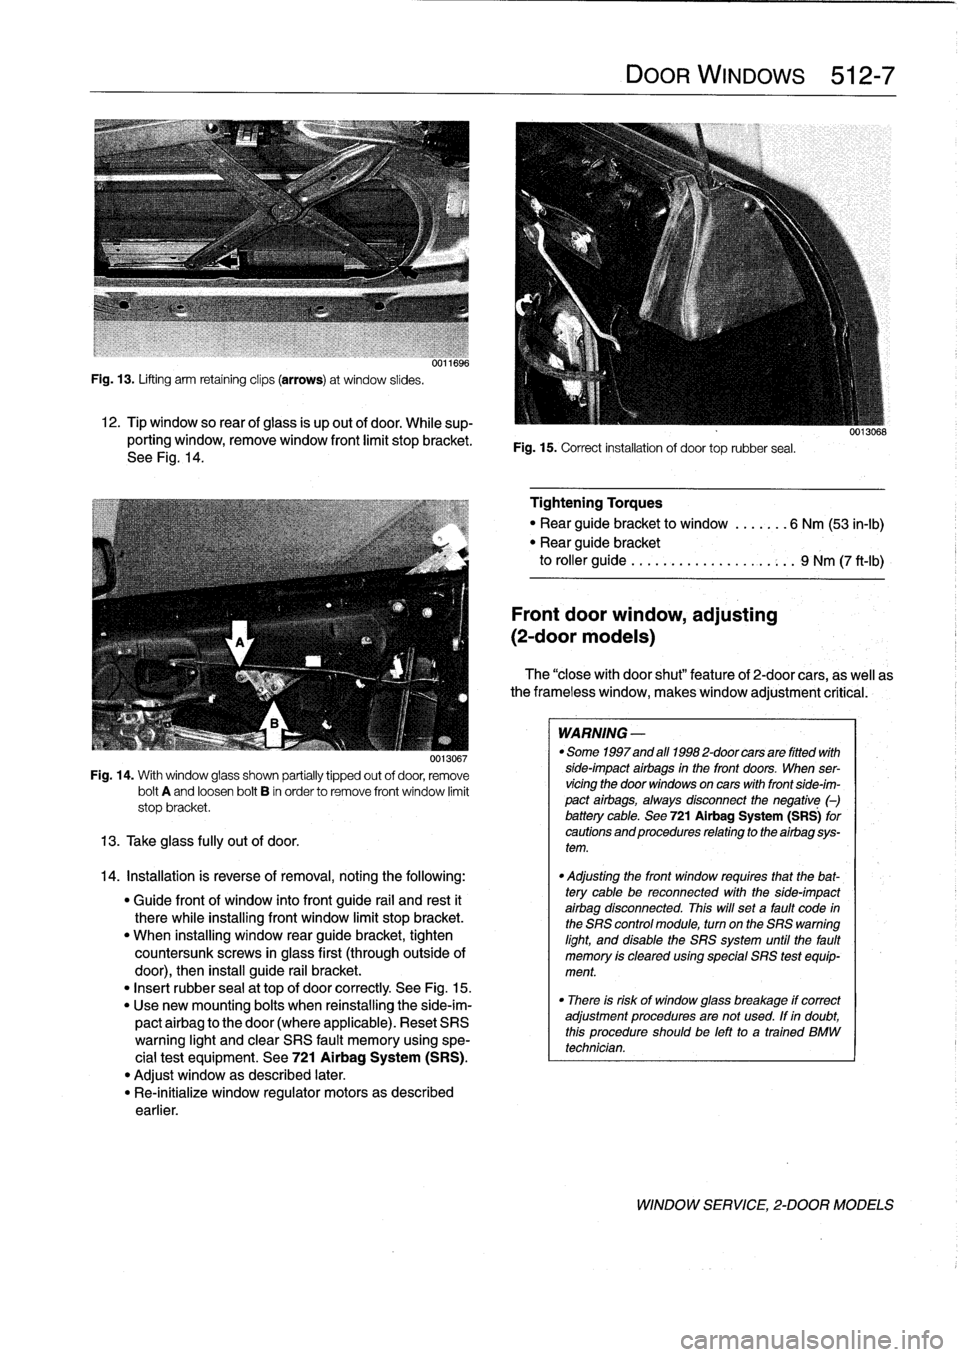 BMW 318i 1998 E36 Workshop Manual 
Fig
.
13
.
Lifting
arm
retaining
clips
(arrows)
at
window
slides
.

12
.
Tip
window
so
rear
ofglass
is
up
out
of
door
.
While
sup-
porting
window,
remove
window
front
limit
stopbracket
.
See
Fig
.
14